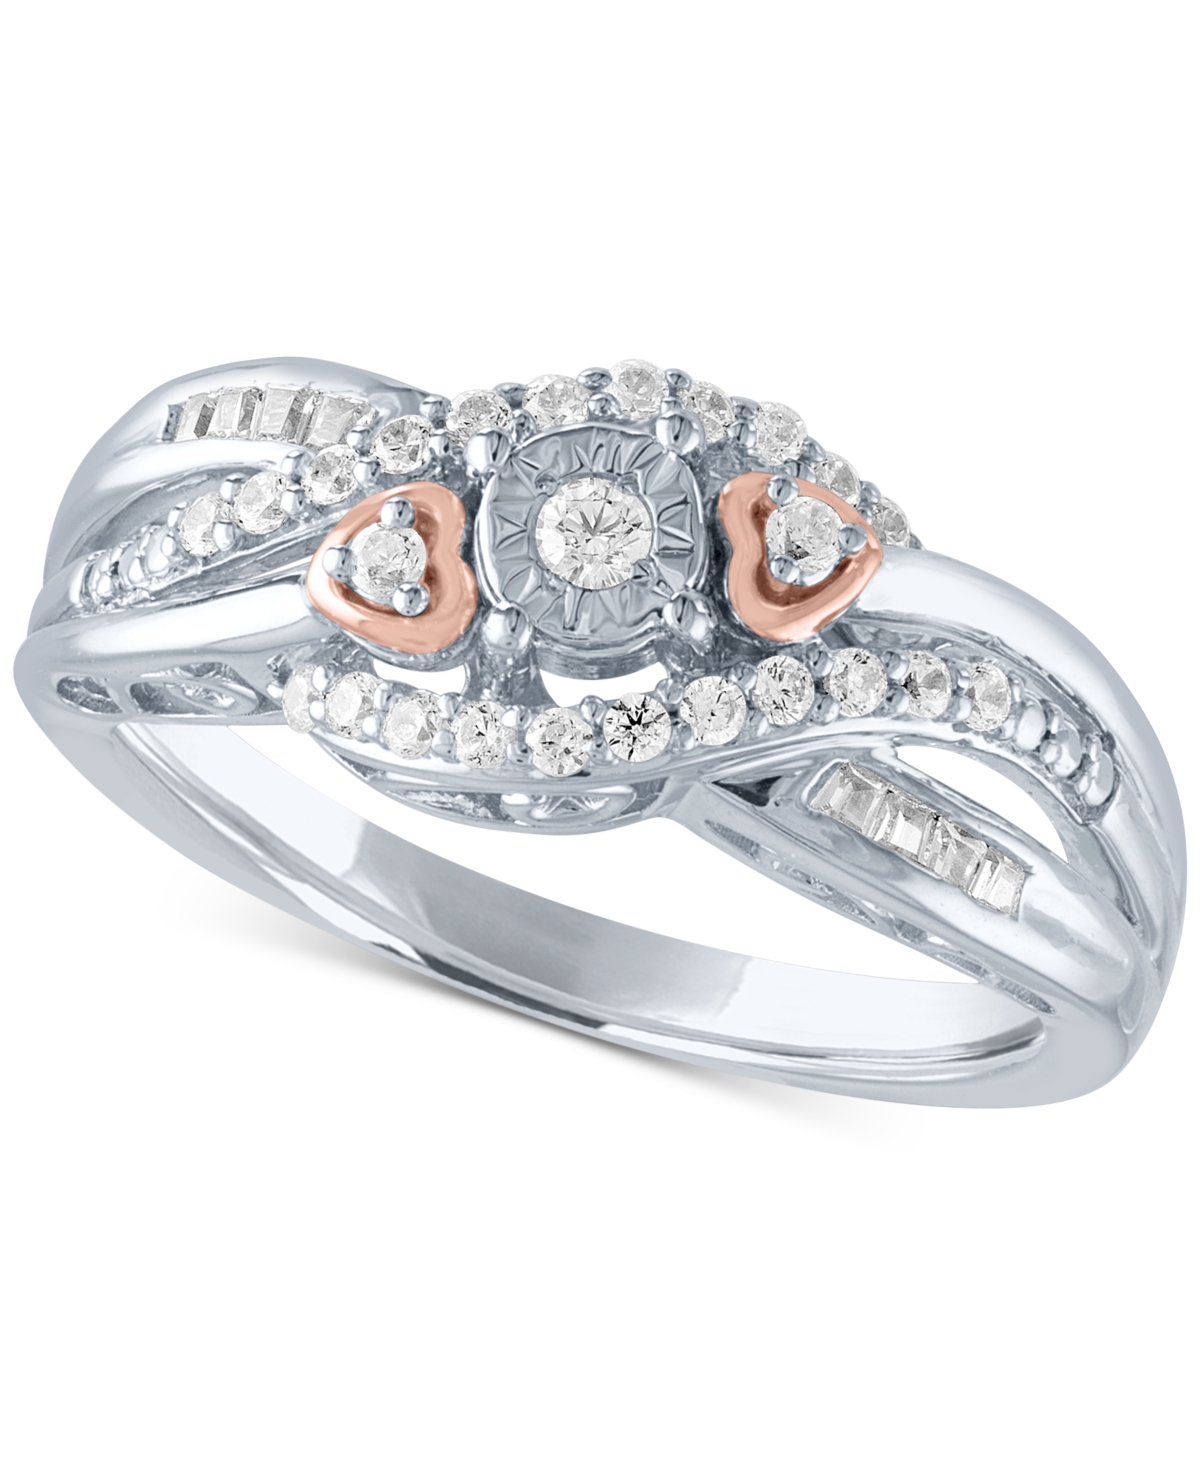 Diamond Promise Ring (1/4 ct. t.w.) in Sterling Silver & 14k Rose Gold-Plate - Sterling Silver